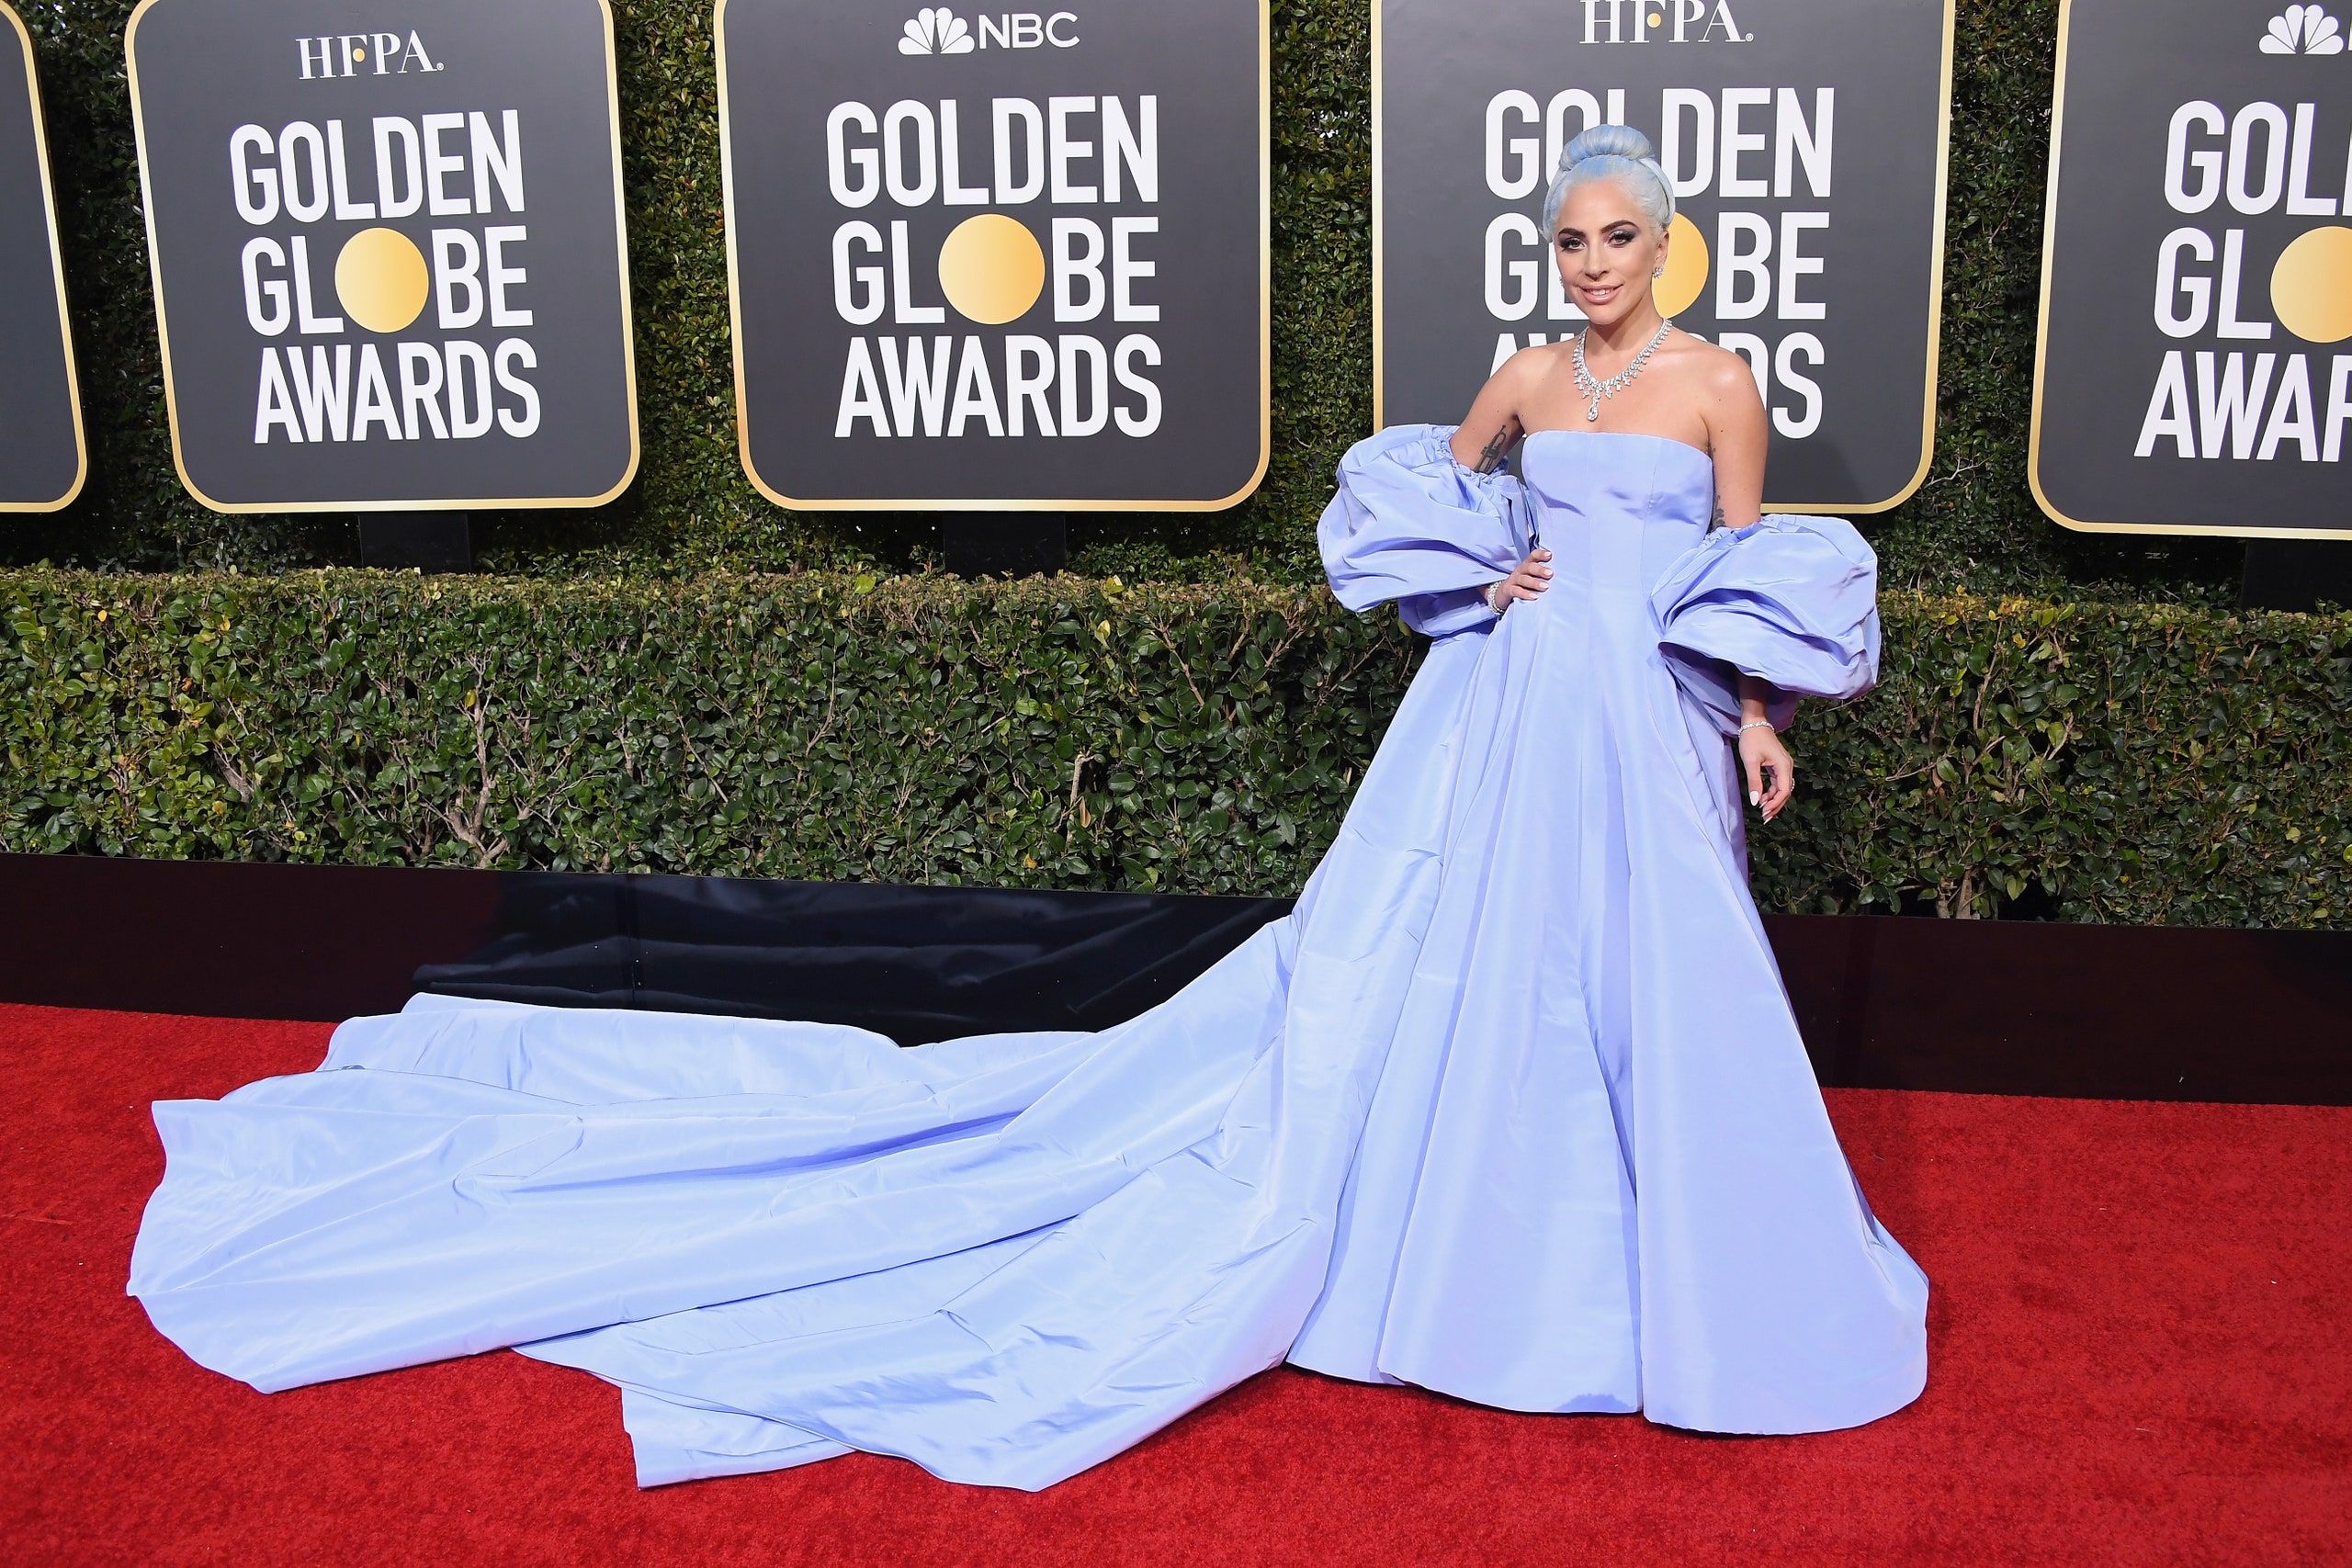 Taylor Swift, Katy Perry, Lady Gaga: Best Red Carpet Moments